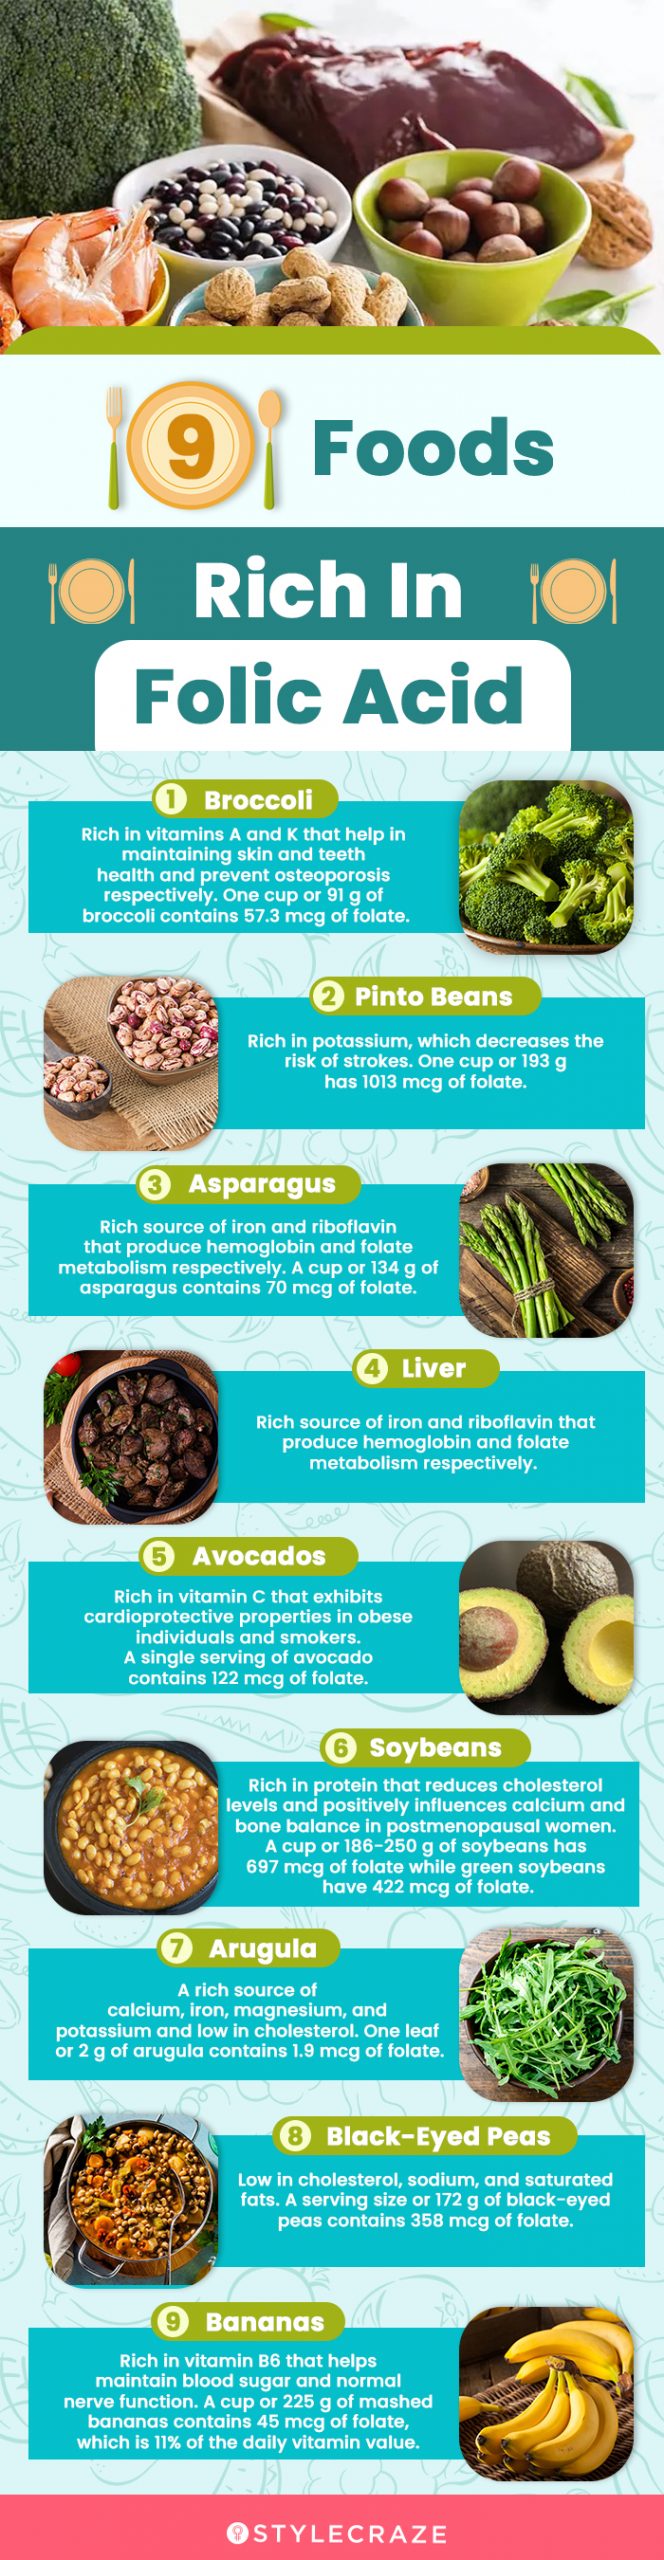 9 foods rich in folic acid (infographic)